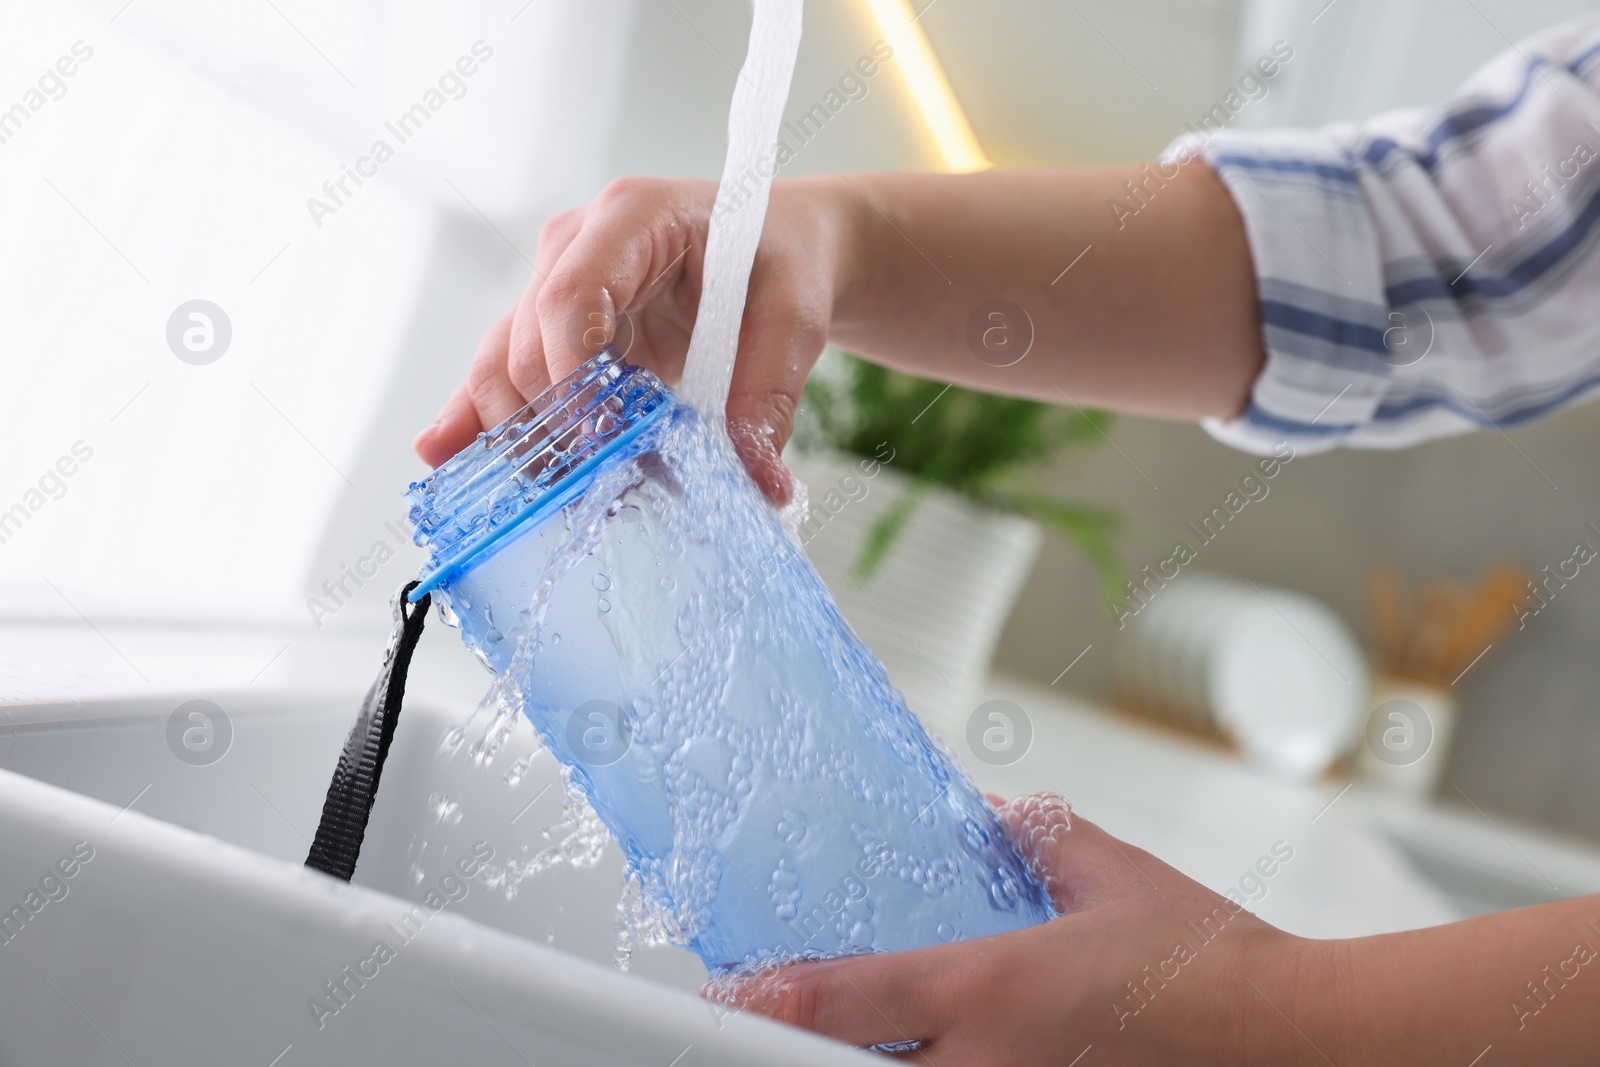 Photo of Woman washing thermo bottle in kitchen, closeup